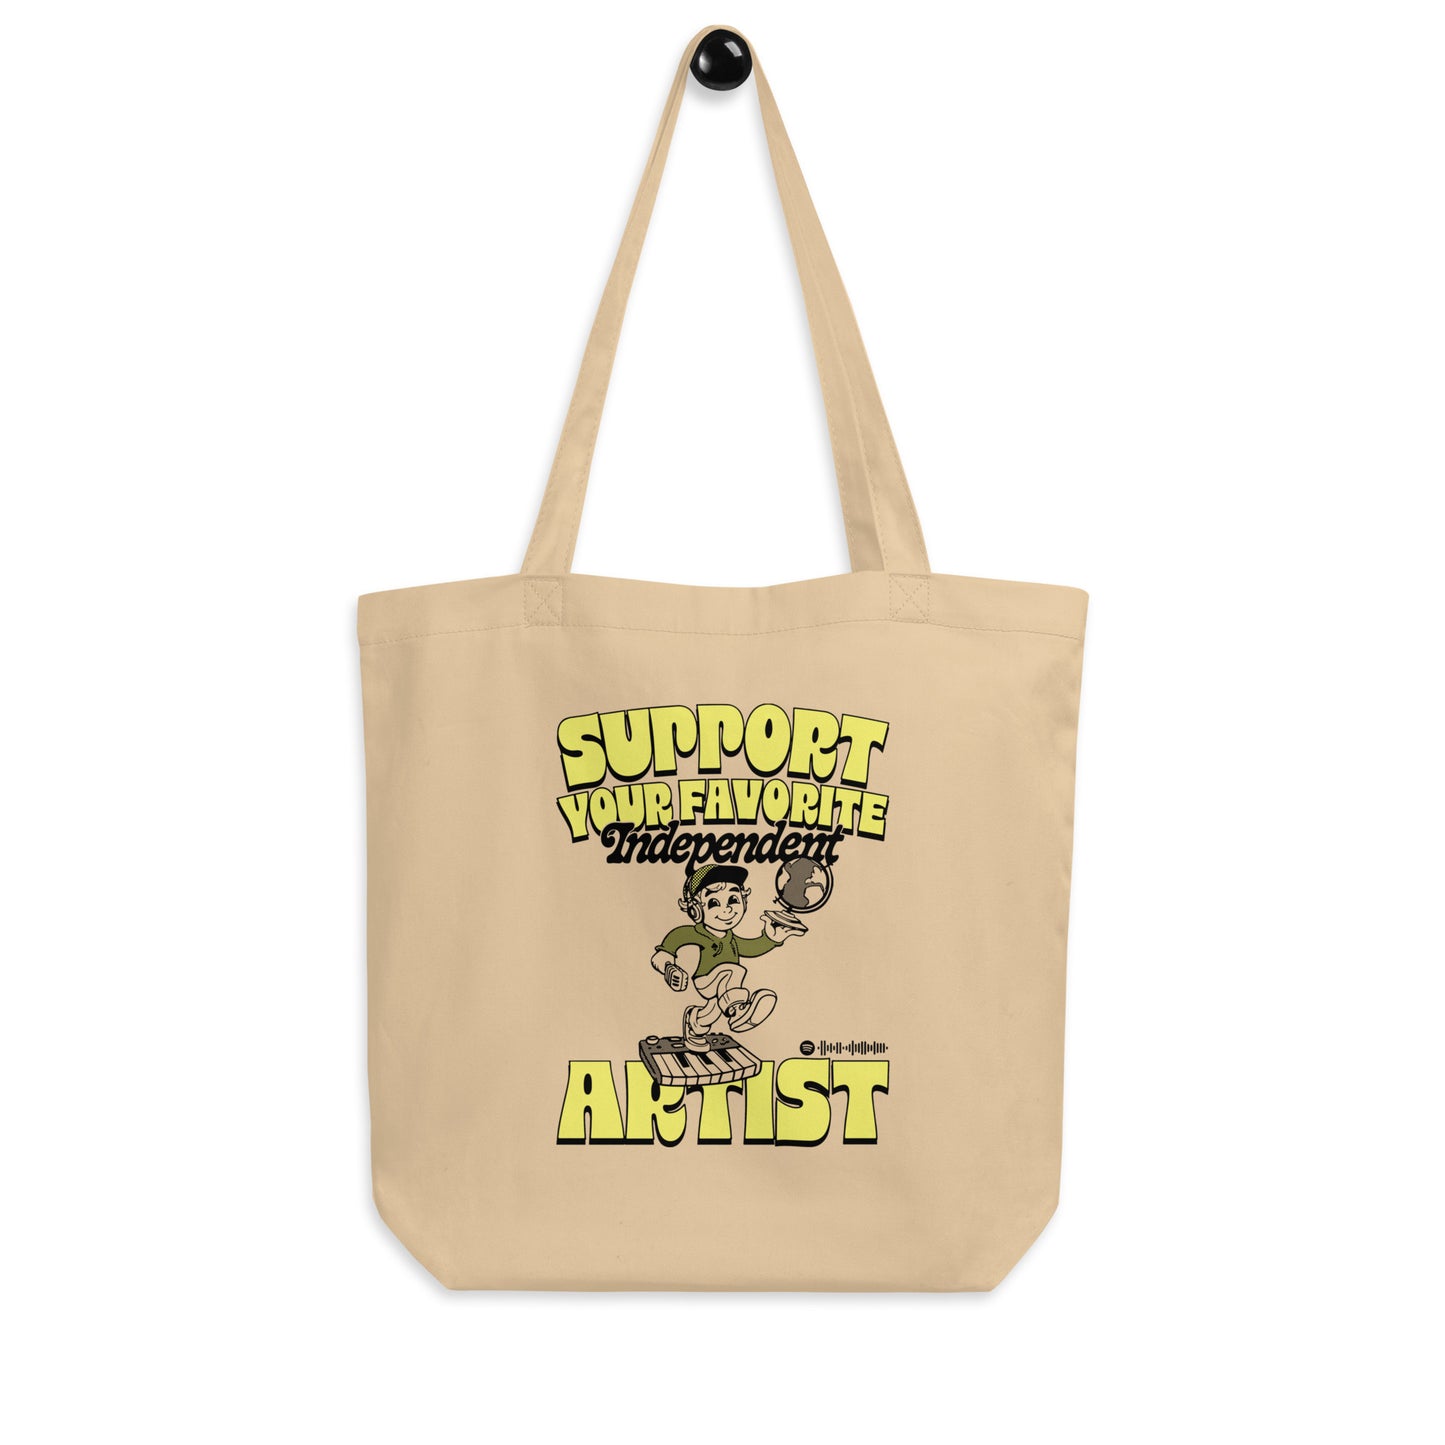 Support Your Favorite Independent Artist Tote Bag